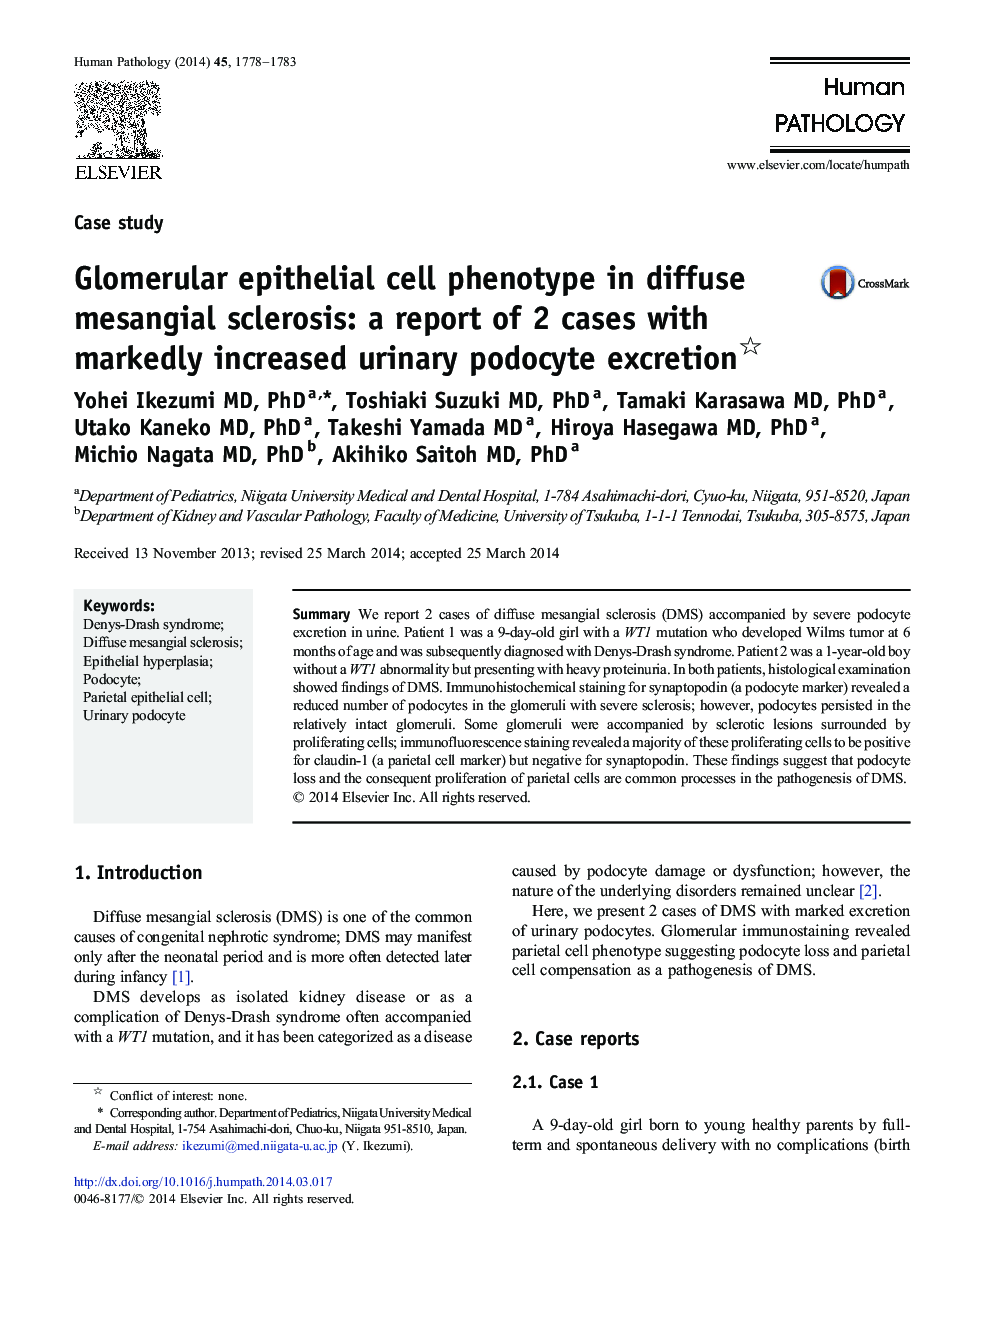 Glomerular epithelial cell phenotype in diffuse mesangial sclerosis: a report of 2 cases with markedly increased urinary podocyte excretion